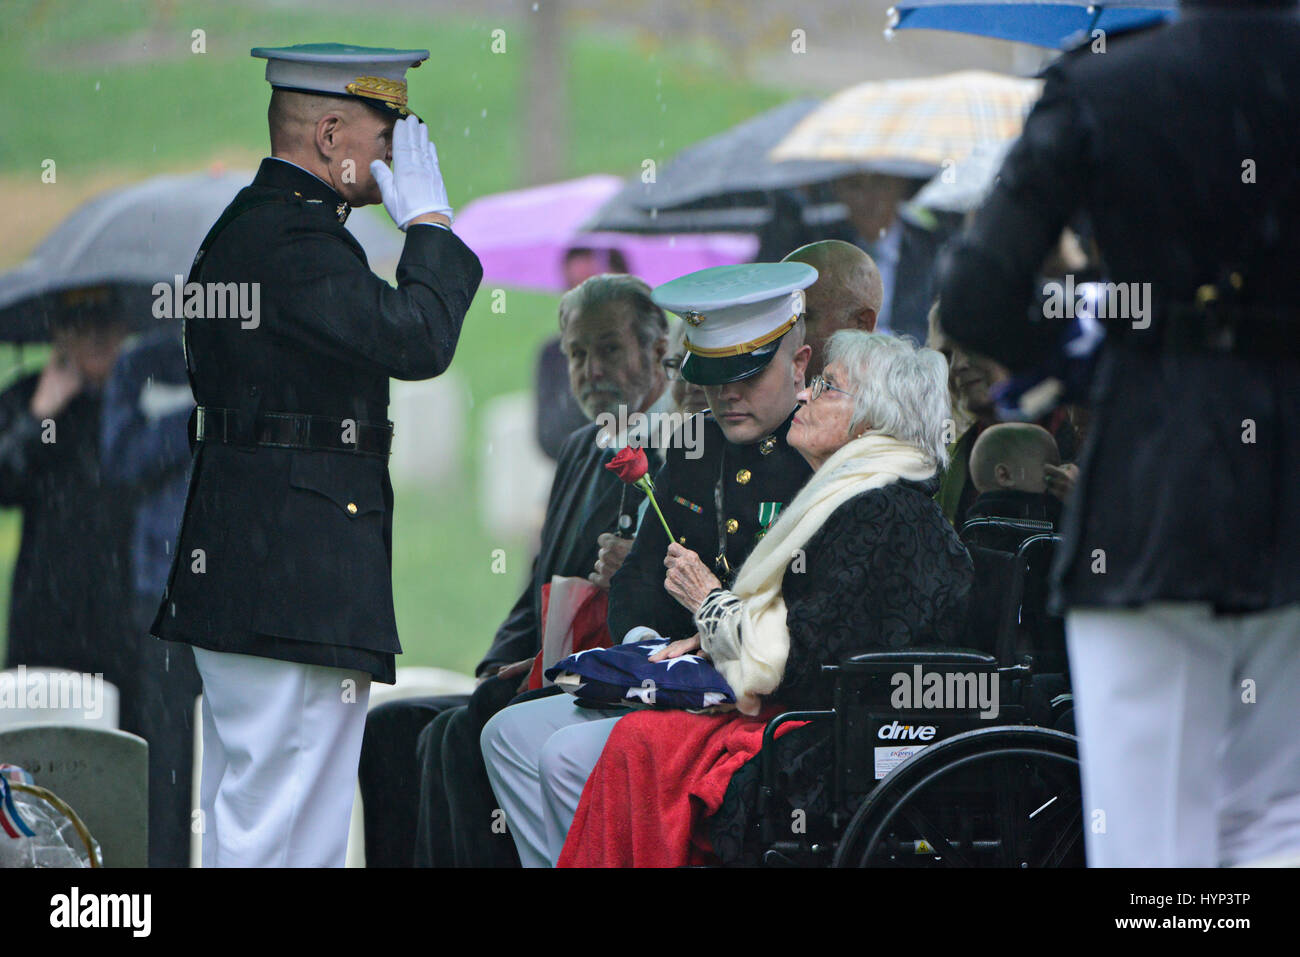 Arlington, Virginia, USA. 6th Apr, 2017. Commandant of the Marine Corps Gen. Robert Neller, left, salutes Annie Glenn, widow of John Glenn, after presenting her with the flag and a rose during the graveside service in Section 35 of Arlington National Cemetery April 6, 2017 in Arlington, Virginia. Glenn, the first American astronaut to orbit the Earth and later a United States senator, died at the age of 95 on December 8, 2016. Credit: Planetpix/Alamy Live News Stock Photo